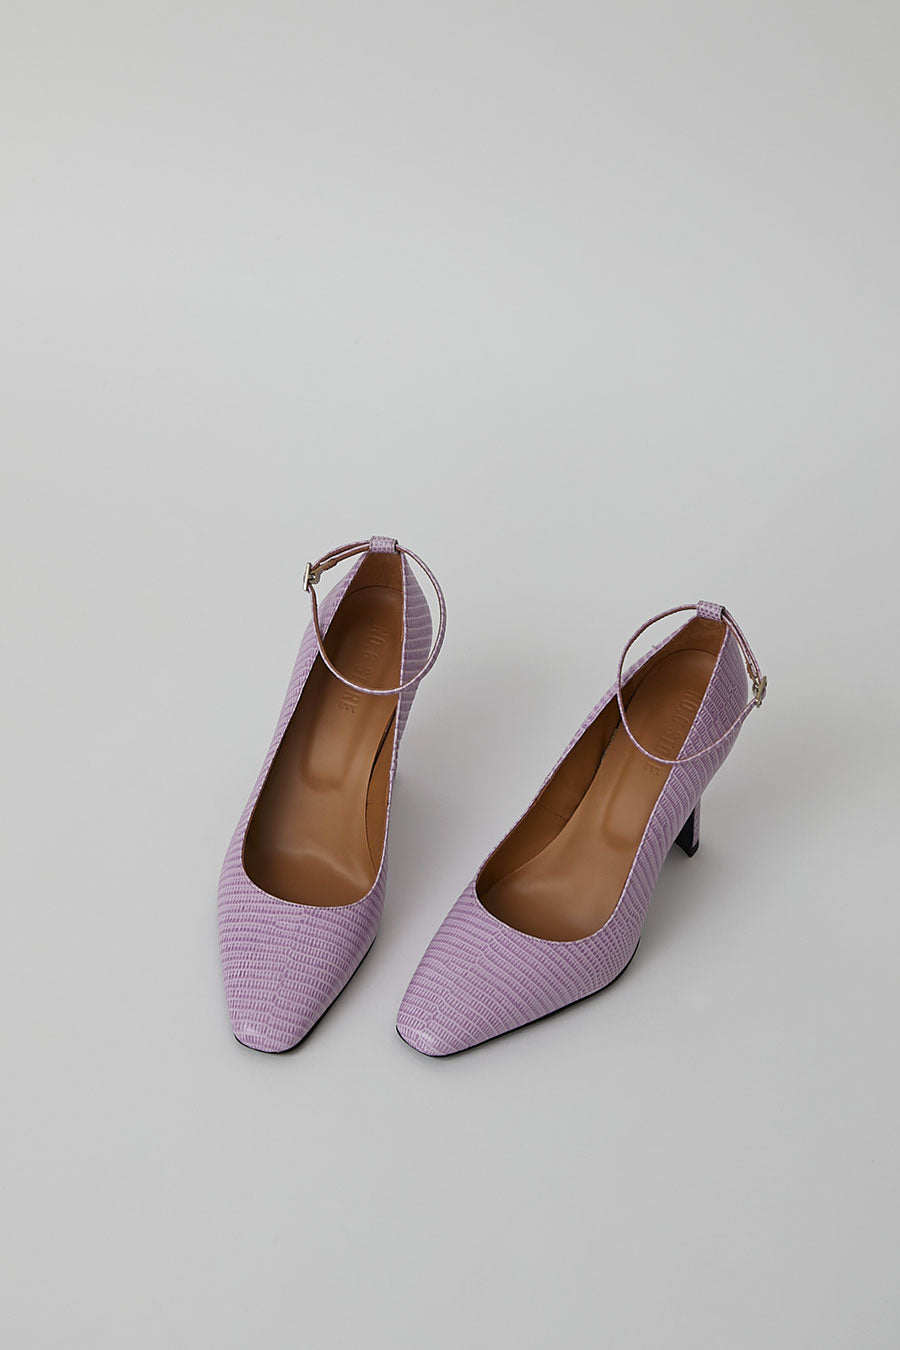 Classic Purple Whitley Spitz High Heels violet - KeeShoes